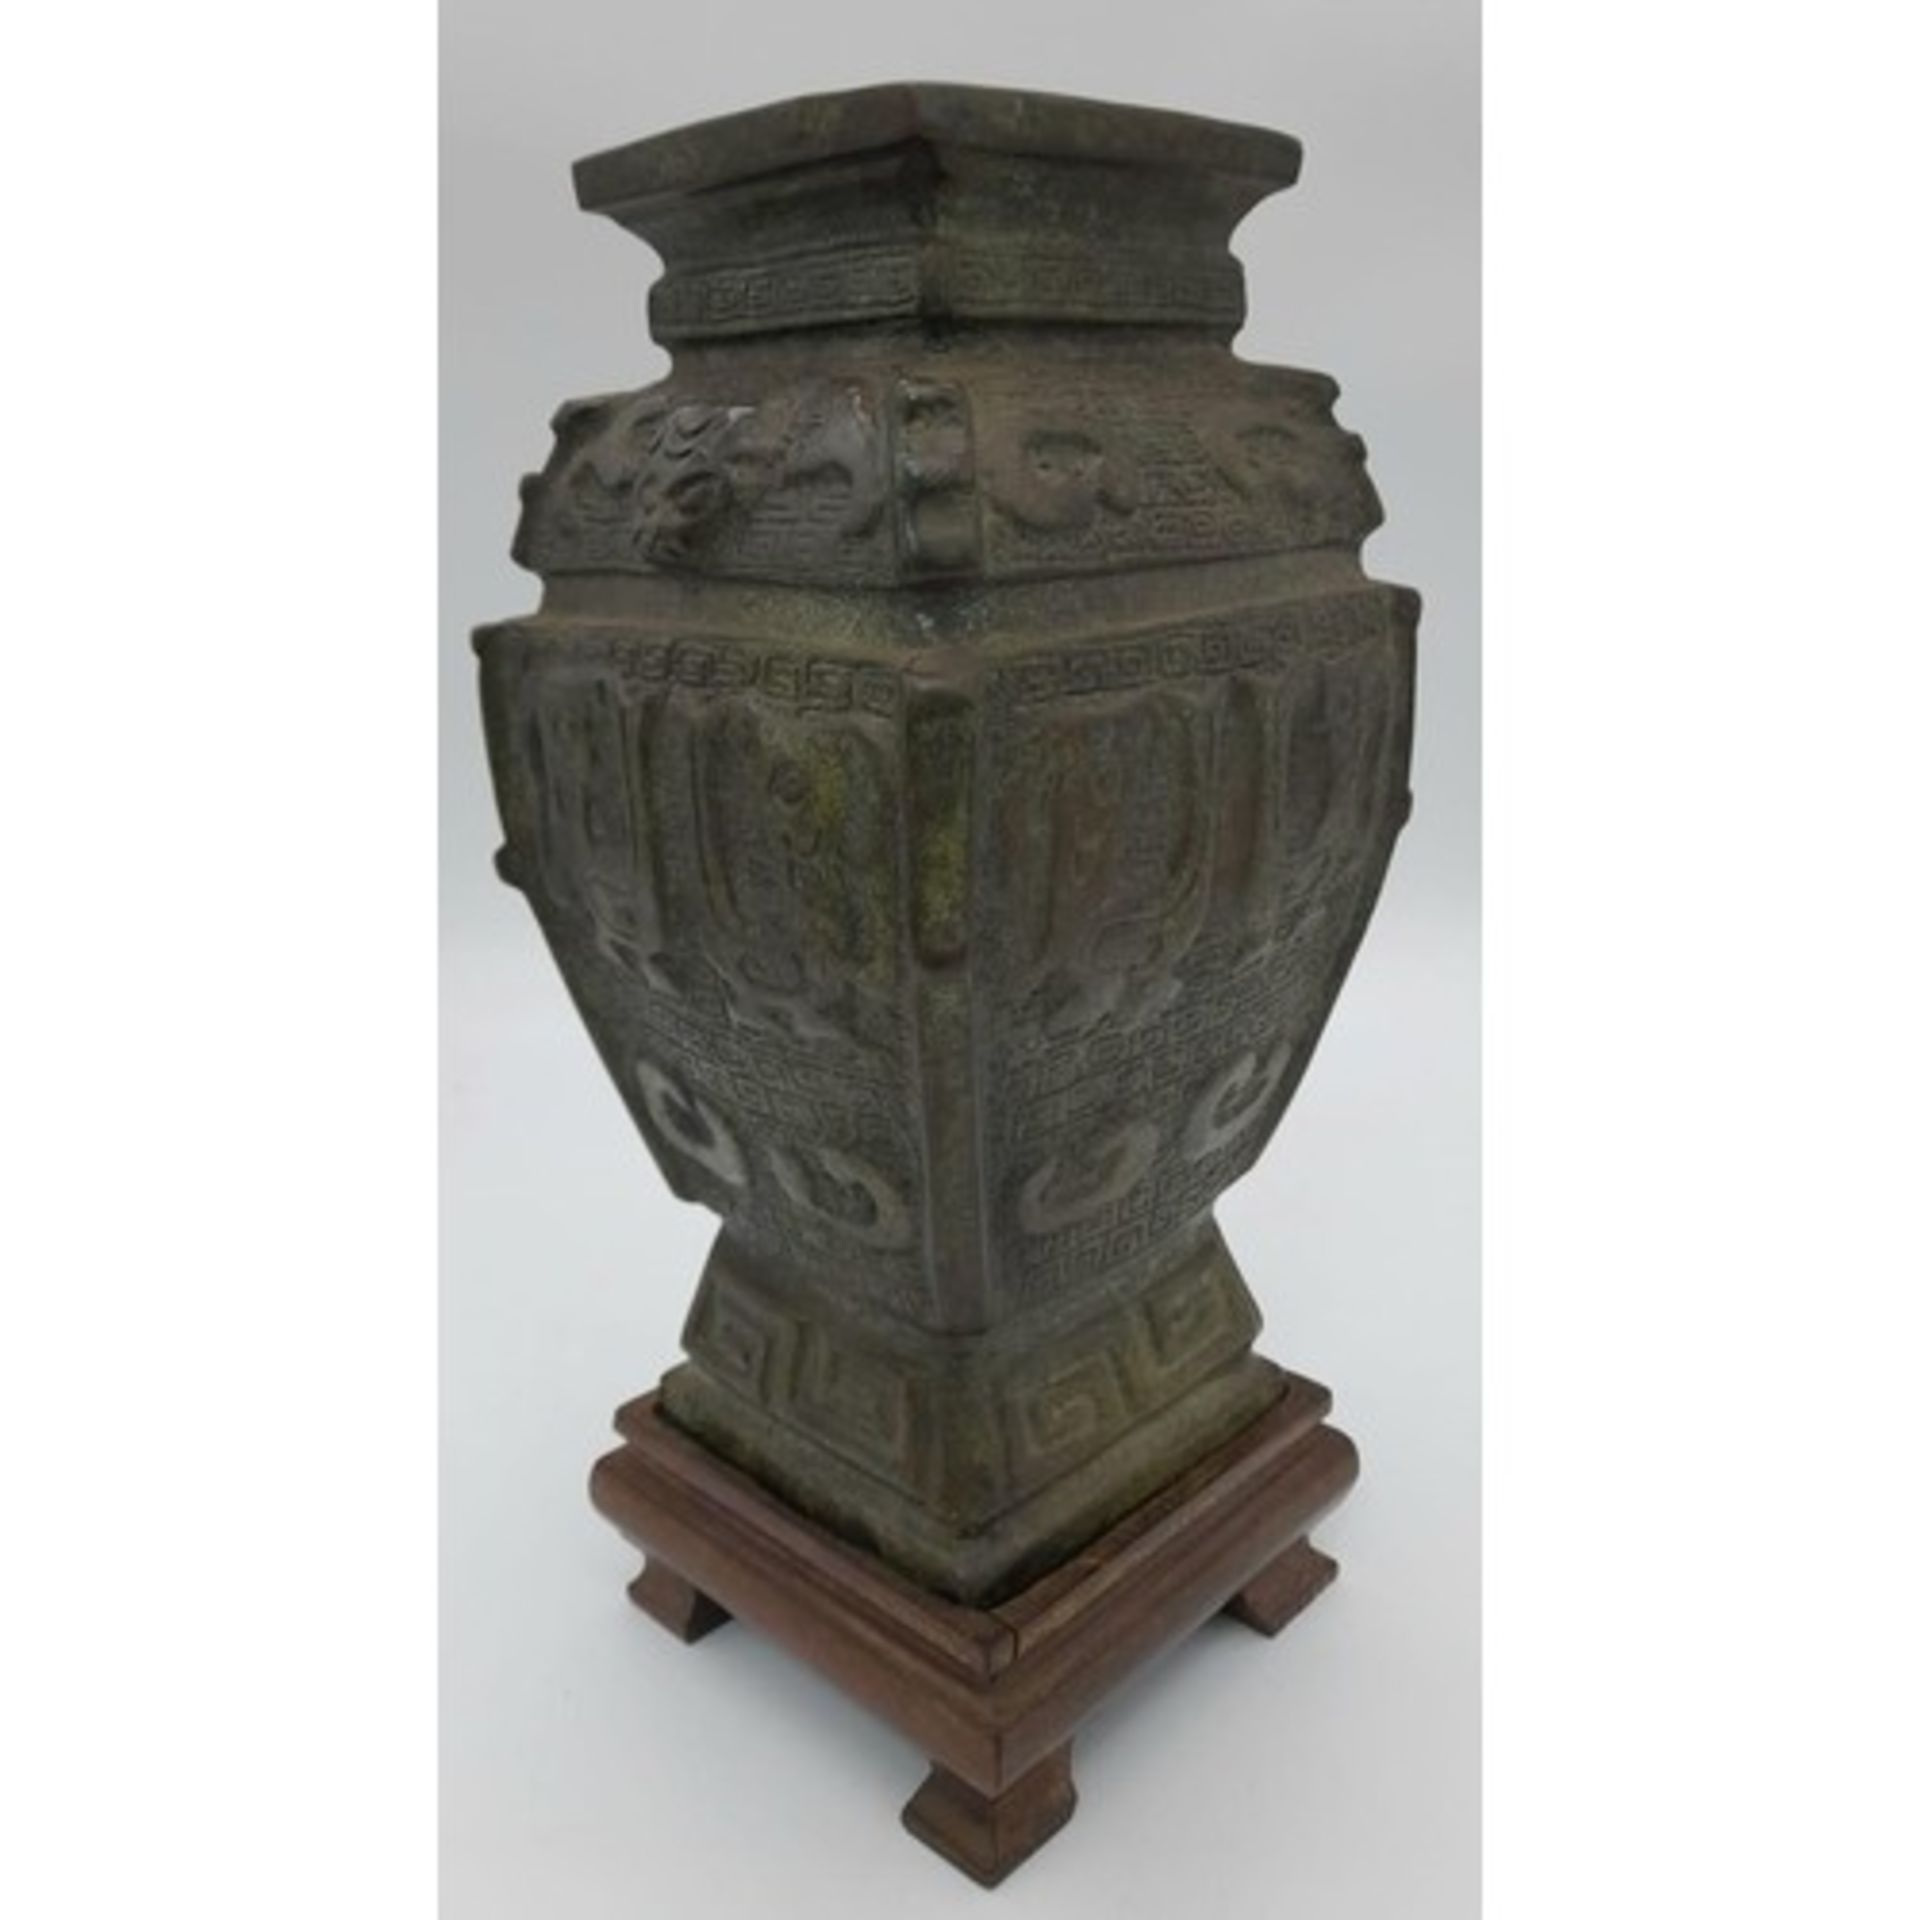 A Beautiful Qing Dynasty Bronze vase. Wonderful archaic detail with a well-aged patina. Comes on a - Image 2 of 3